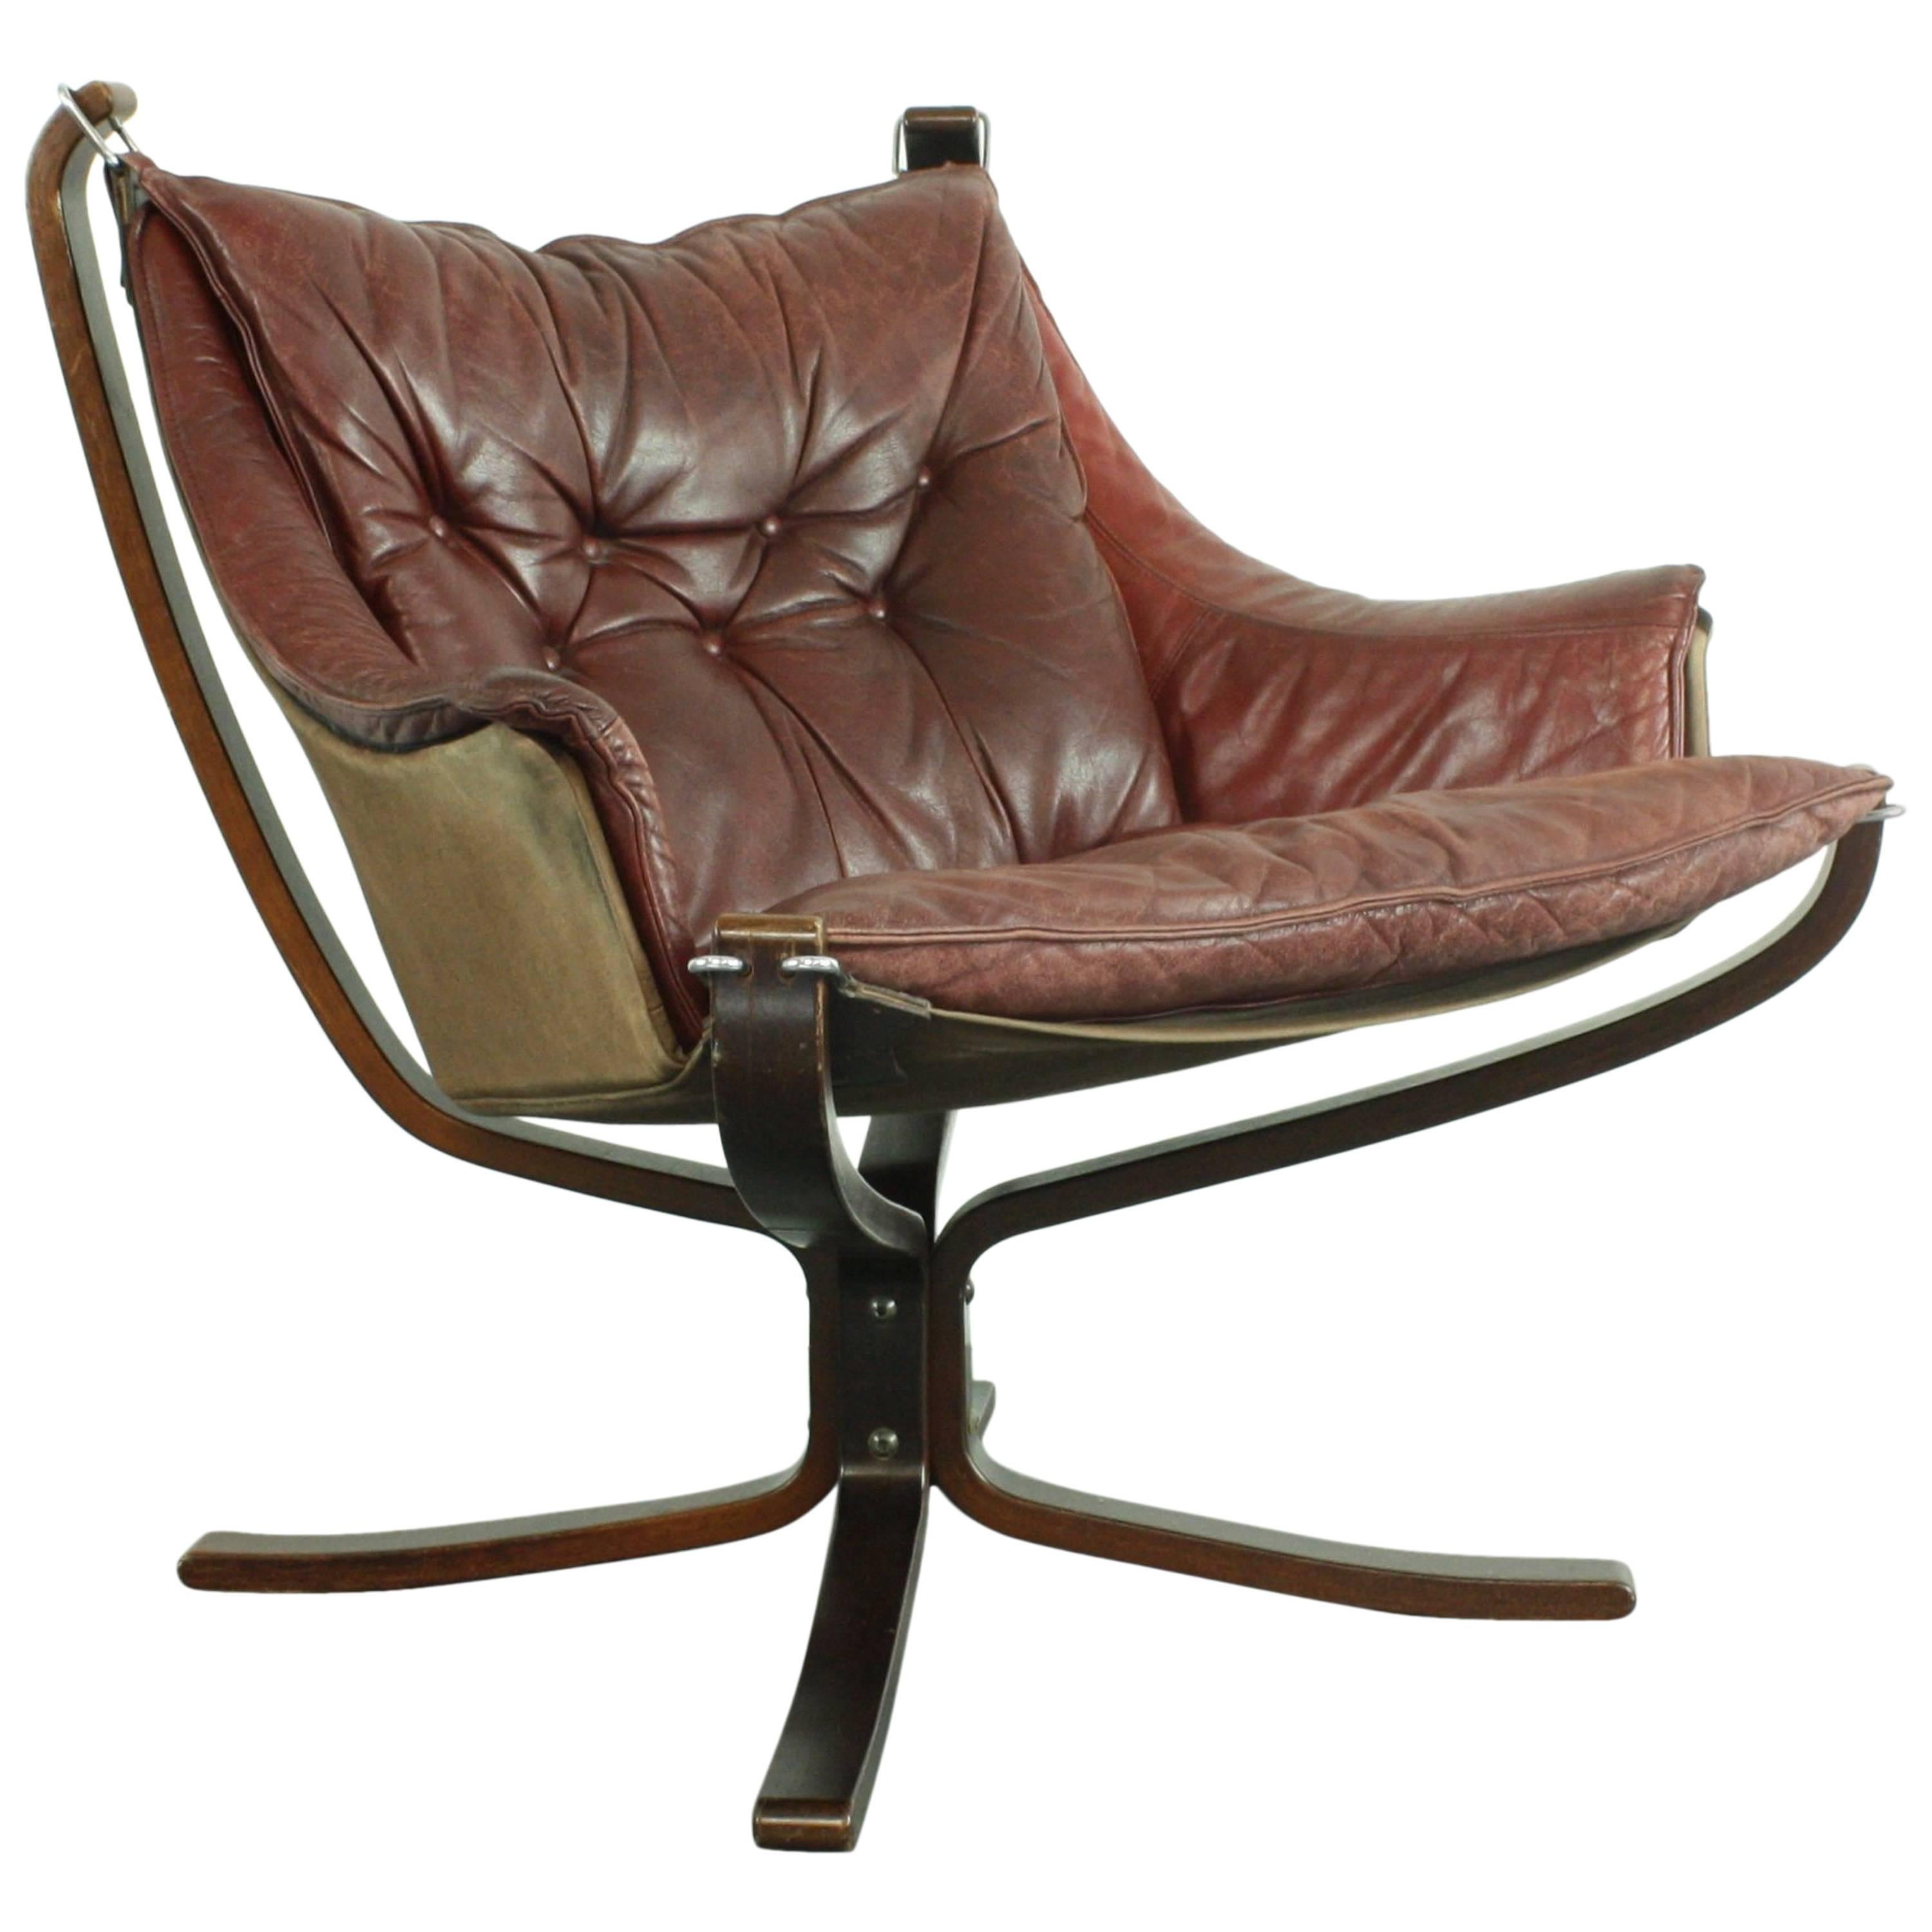 Low Back Winged Chestnut Brown Leather Falcon Chair Designed by Sigurd Resell For Sale